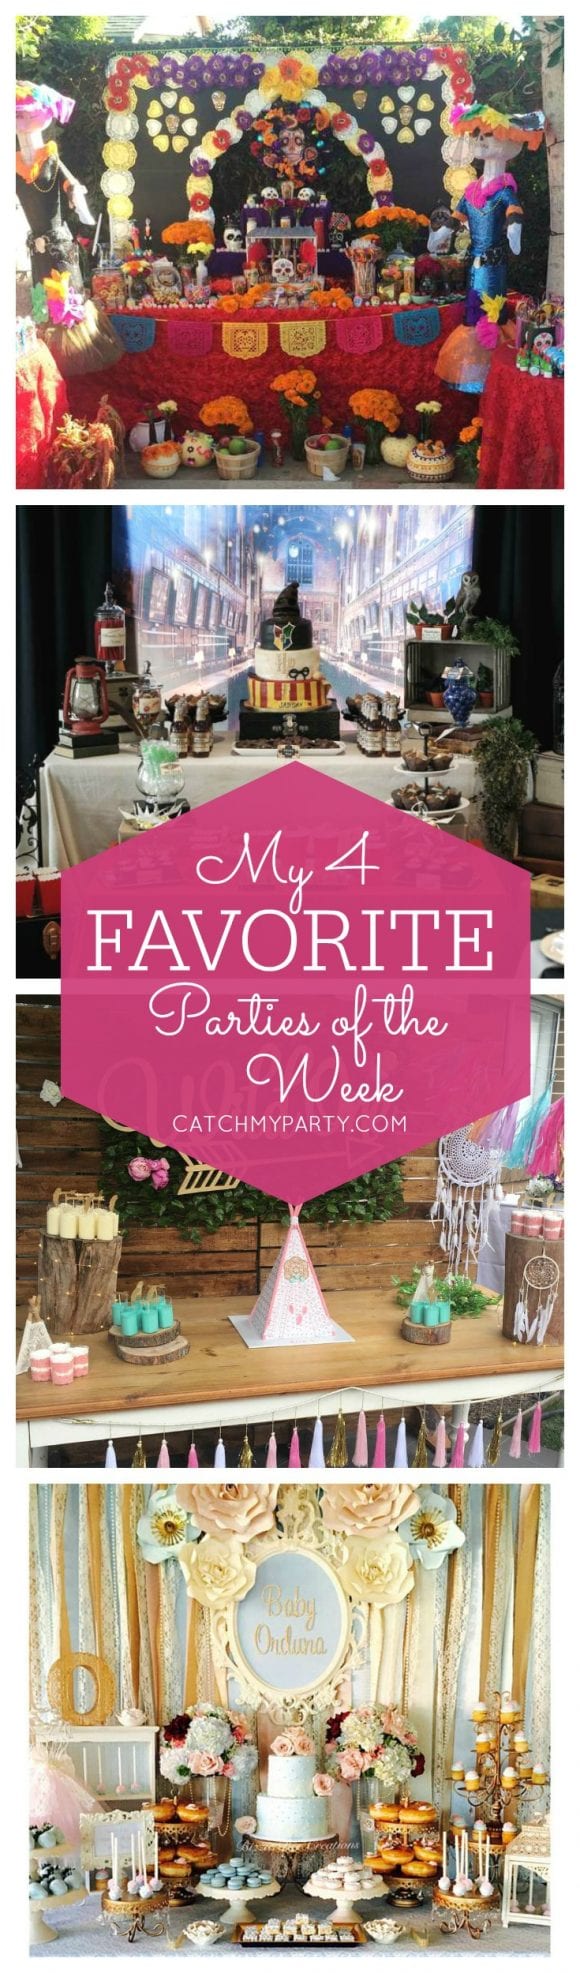 My favorite parties this week include a Dia de los Muertos birthday party, a Harry Potter birthday party, a Wild One 1st birthday party and a Vintage Victorian baby shower! | Catchmyparty.com